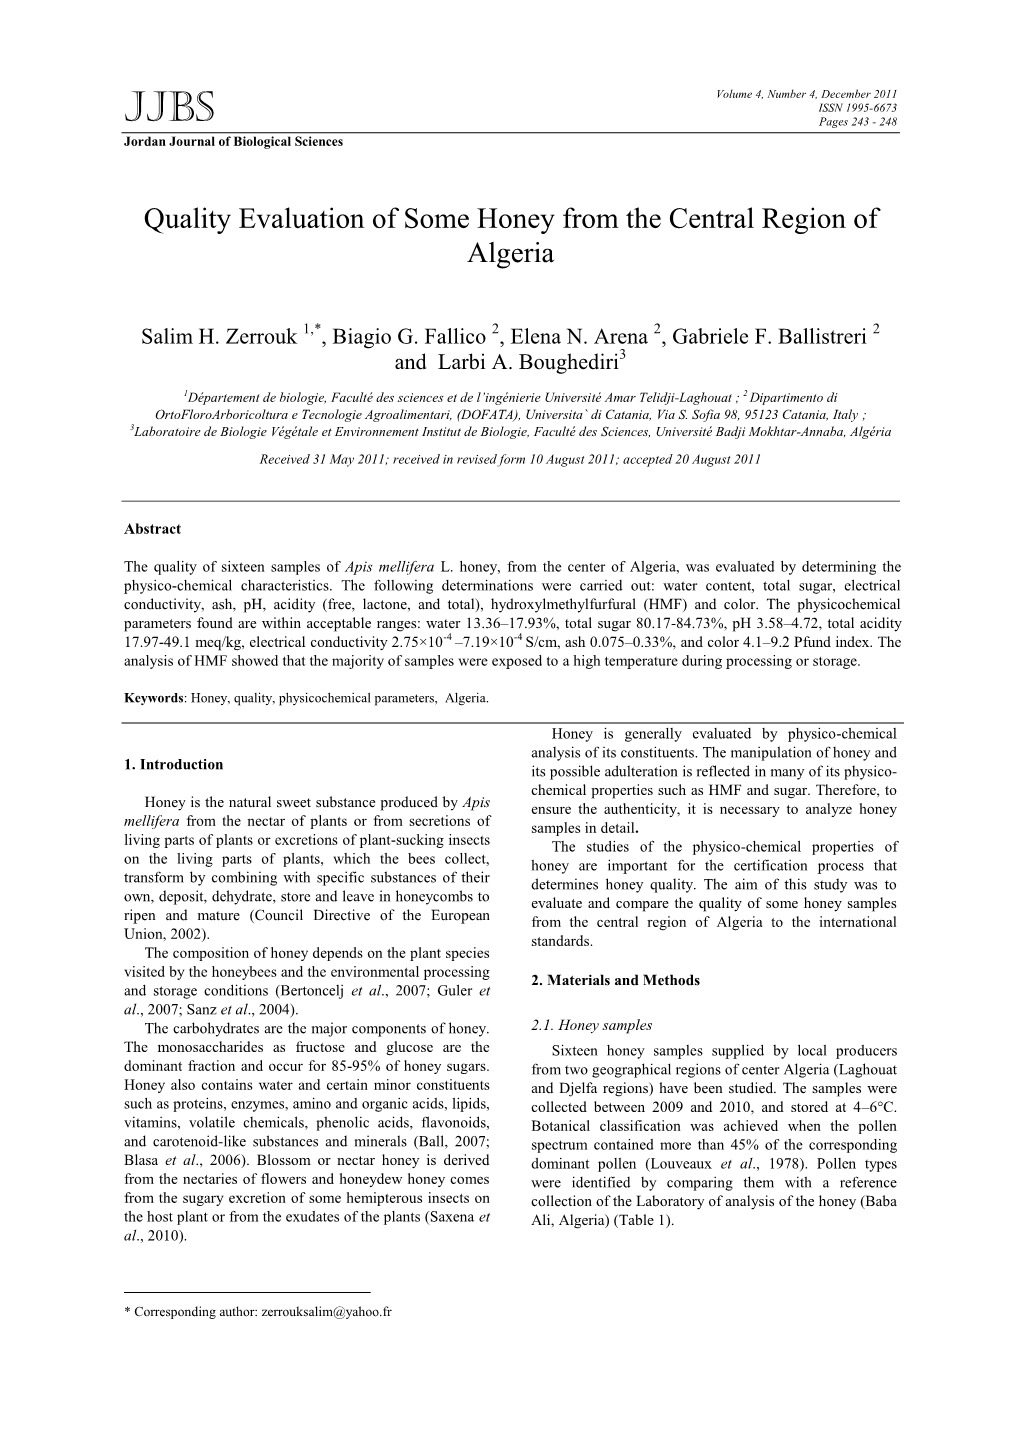 Quality Evaluation of Some Honey from the Central Region of Algeria